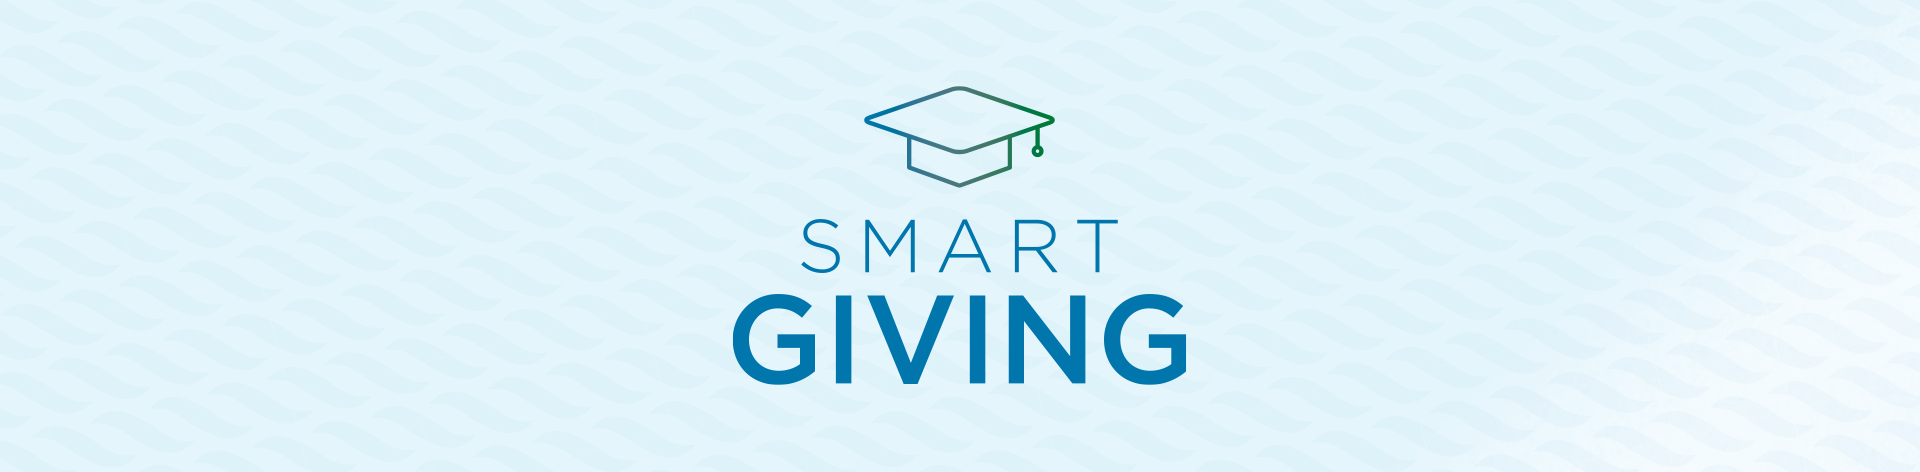 smart giving ministry services